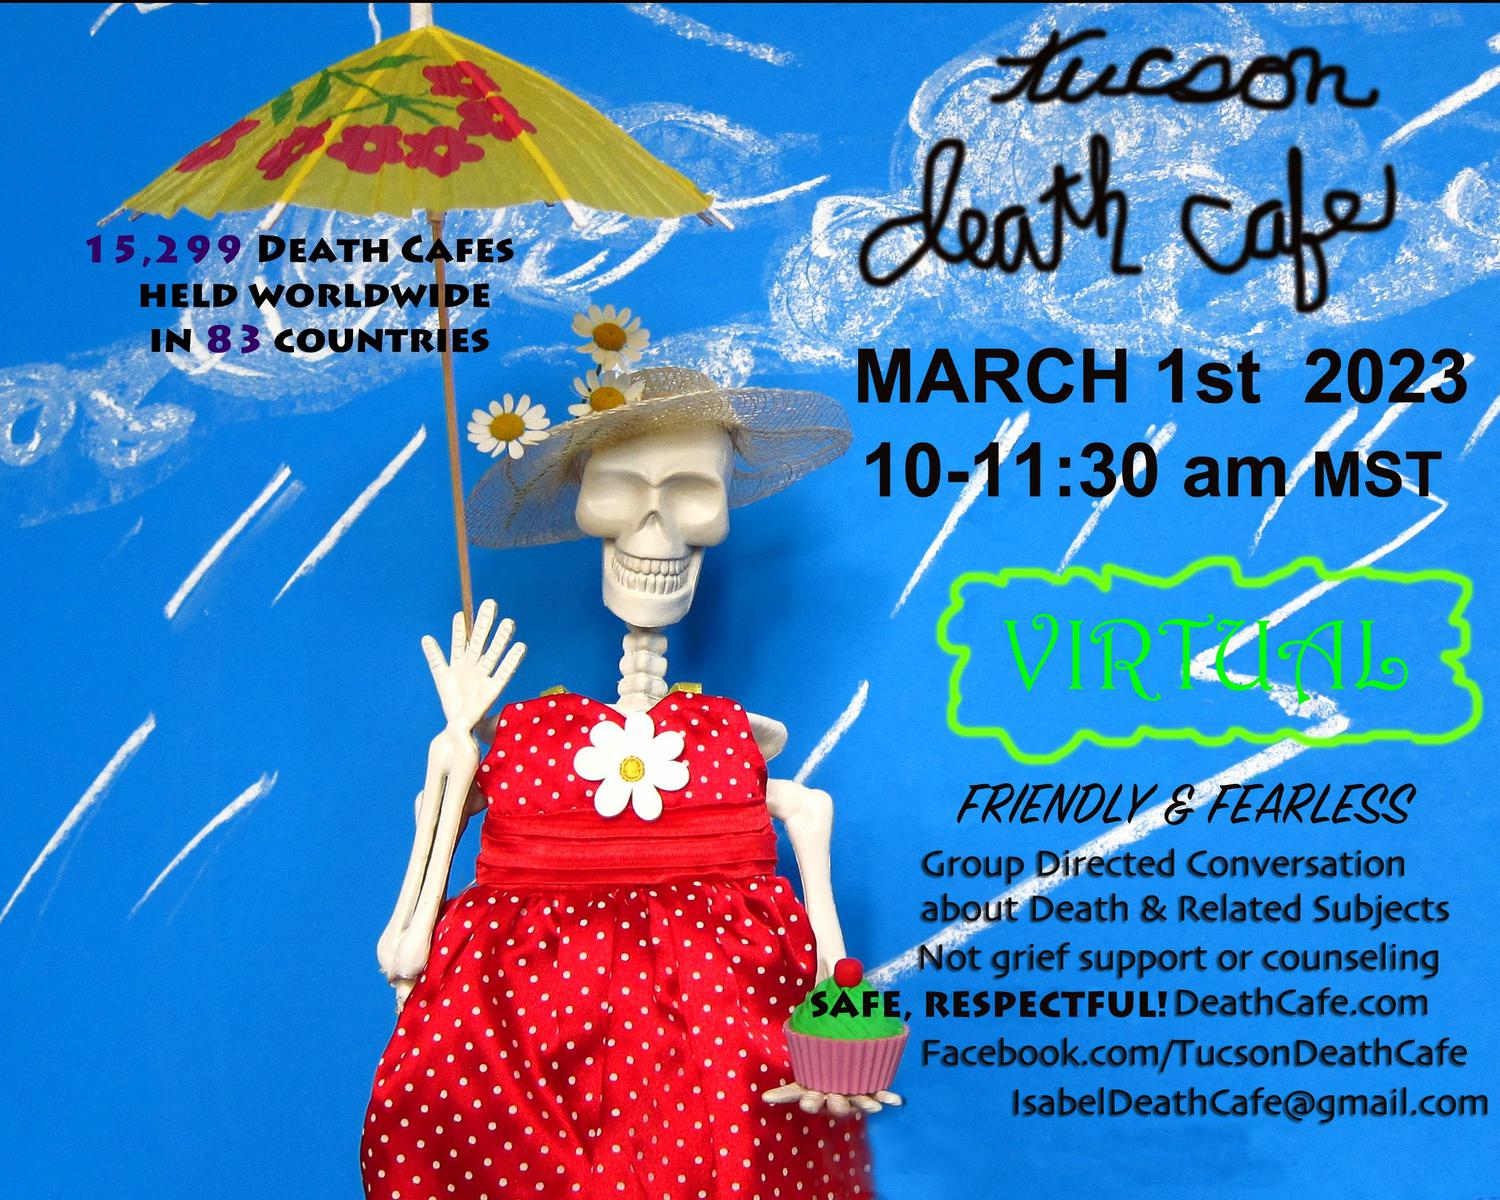 Tucson Online MST Friendly & Fearless Death Cafe